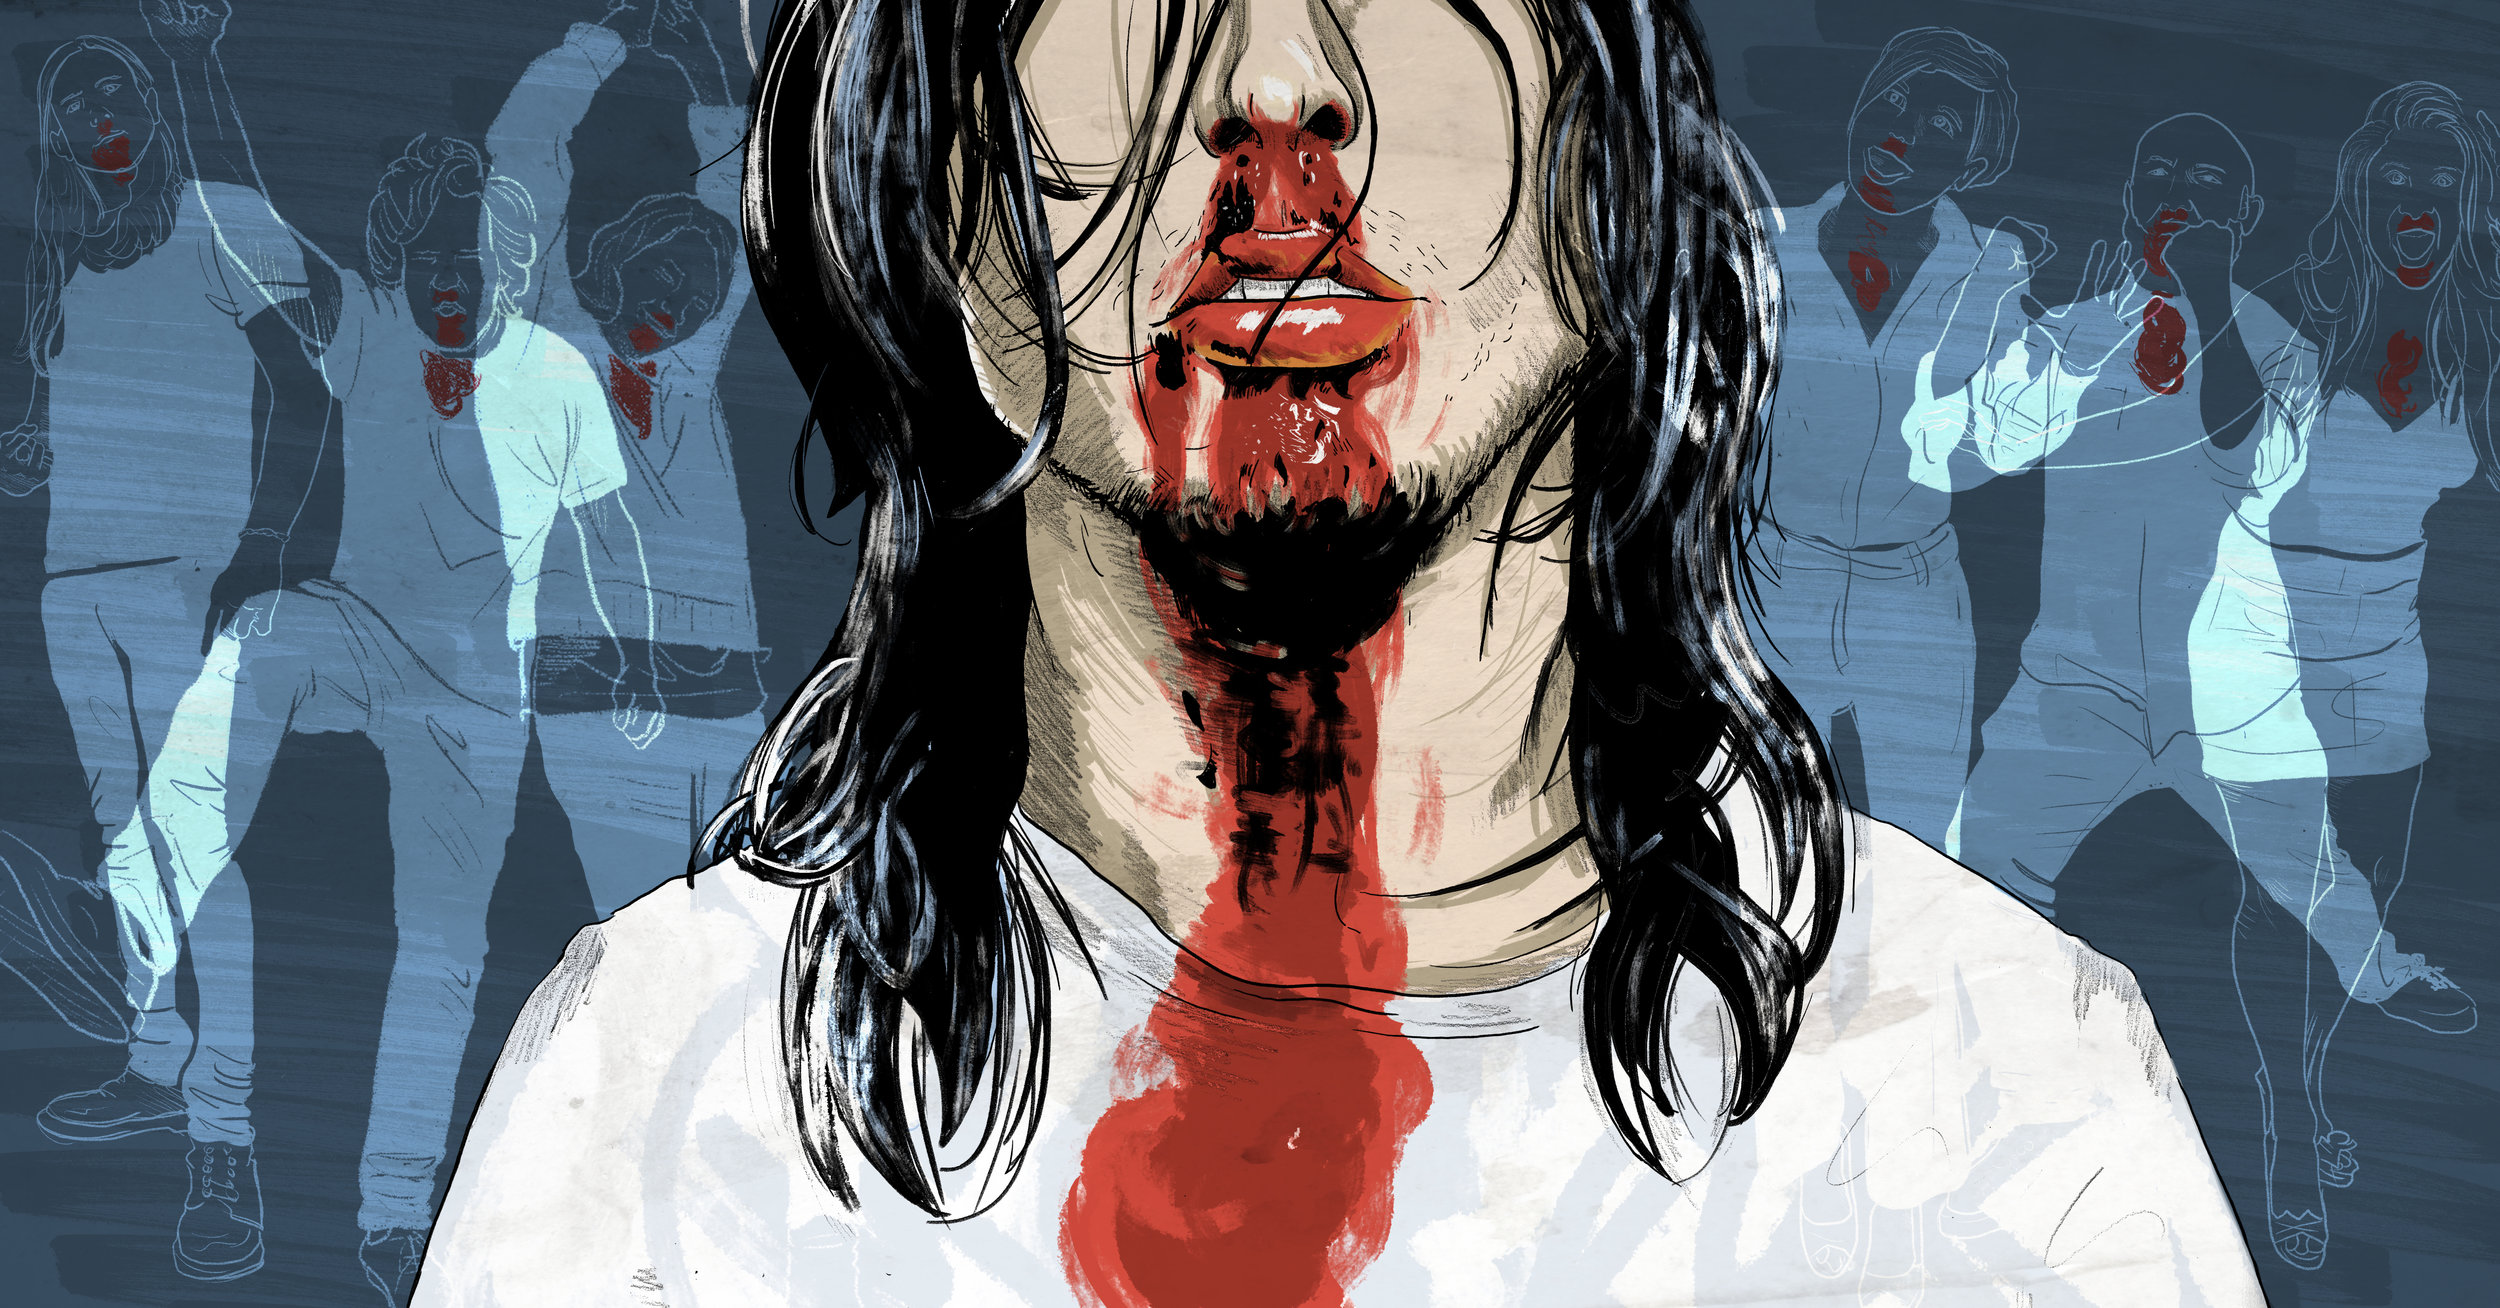 Andrew WK - 15 Years After ‘I Get Wet,’ Andrew W.K.’s Nose Is Still Dripping Blood by Dan Ozzi